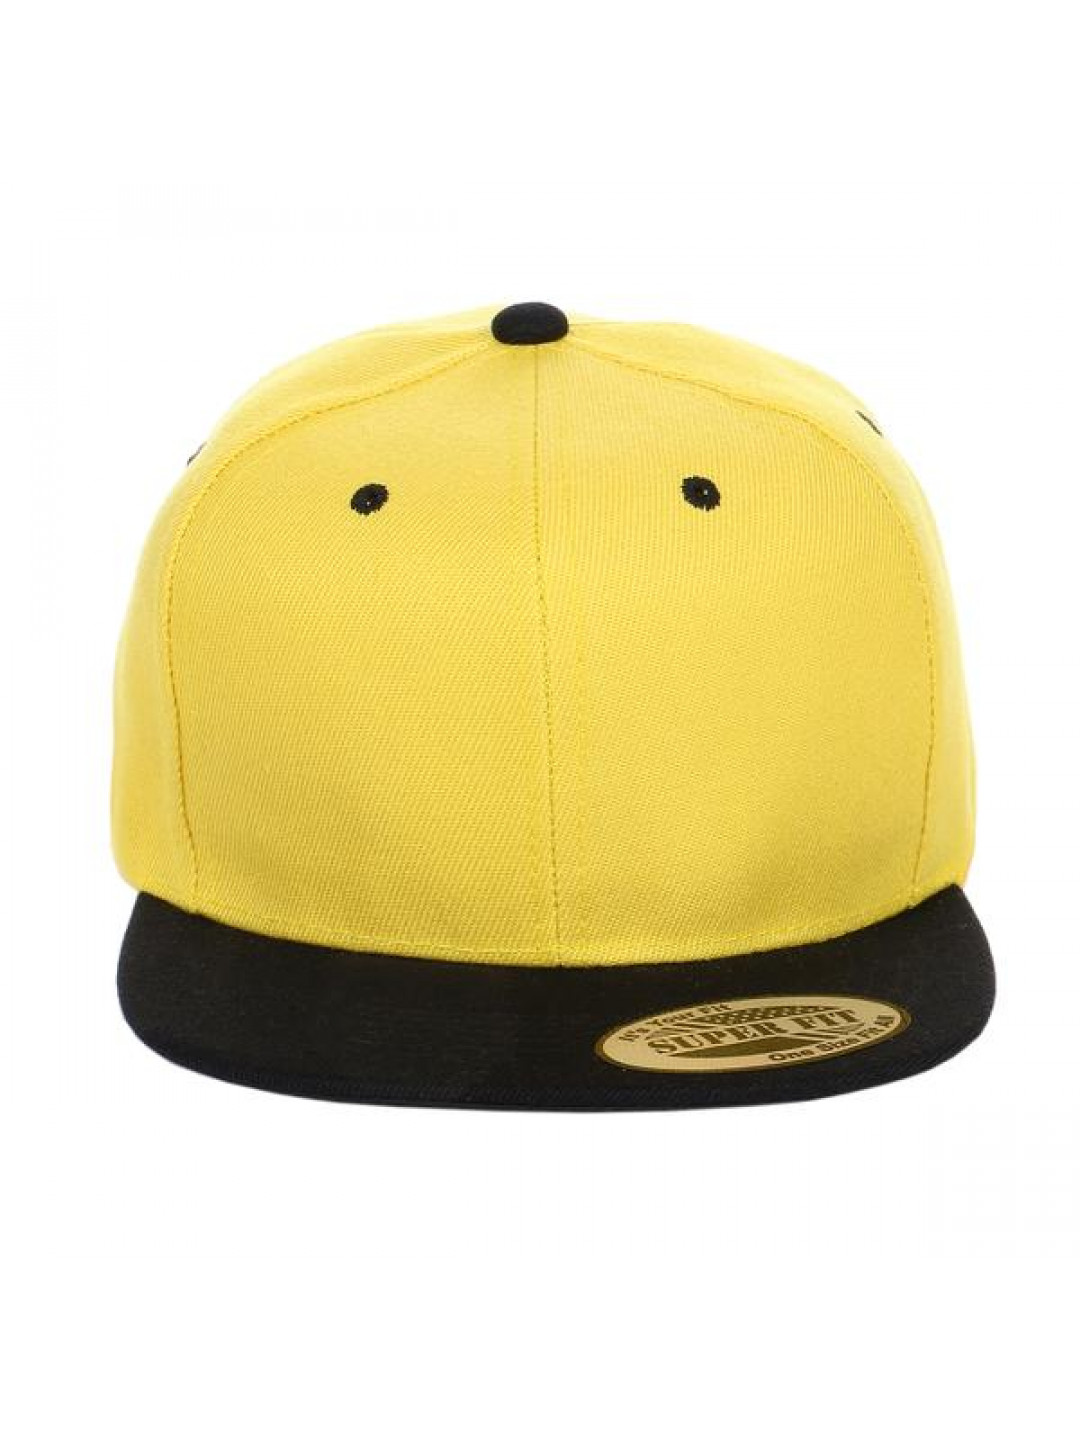 NEW TWO-COLOUR SNAPBACK |YELLOW/BLACK